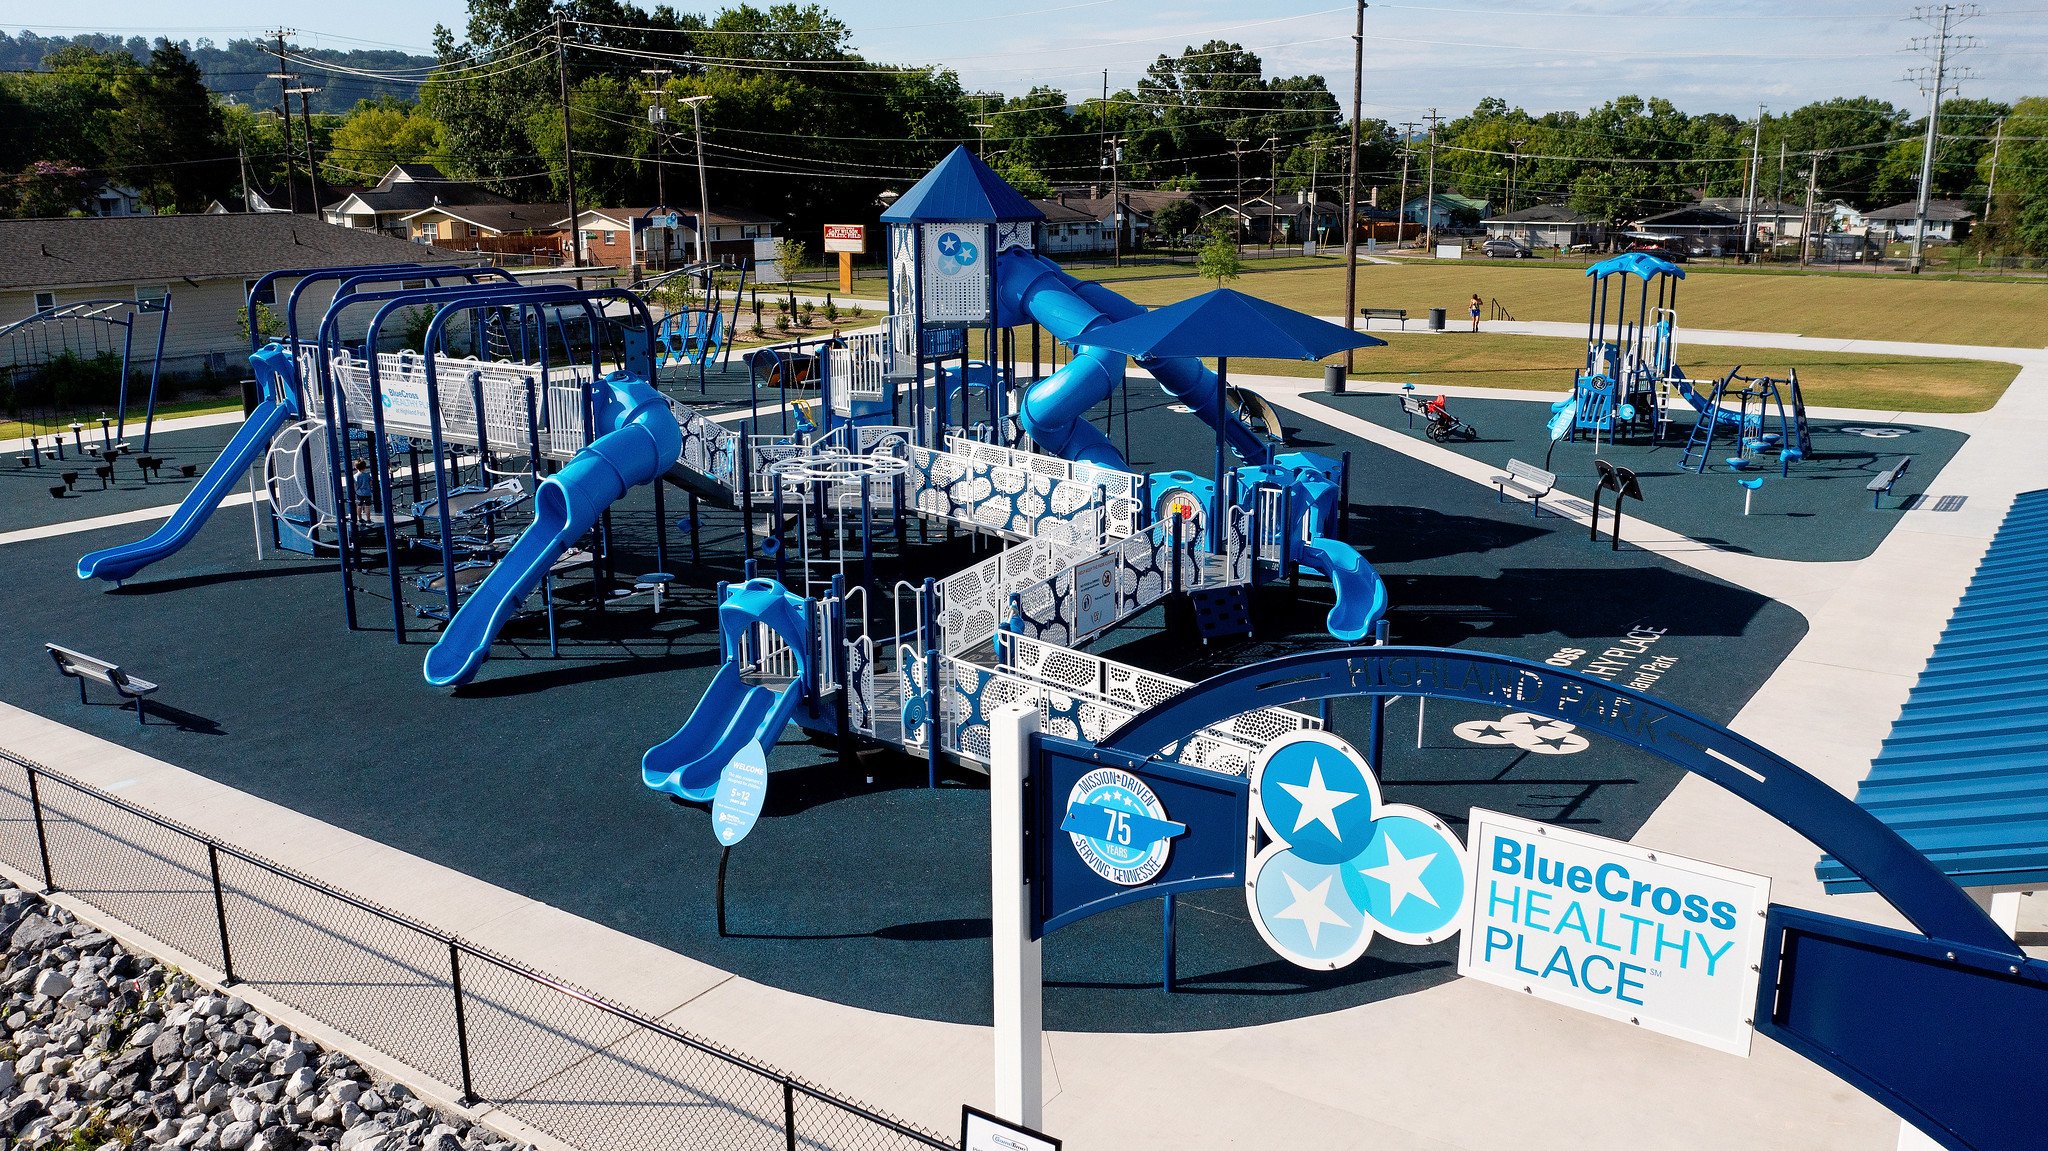 BCBS Healthy Place playground with branded signage